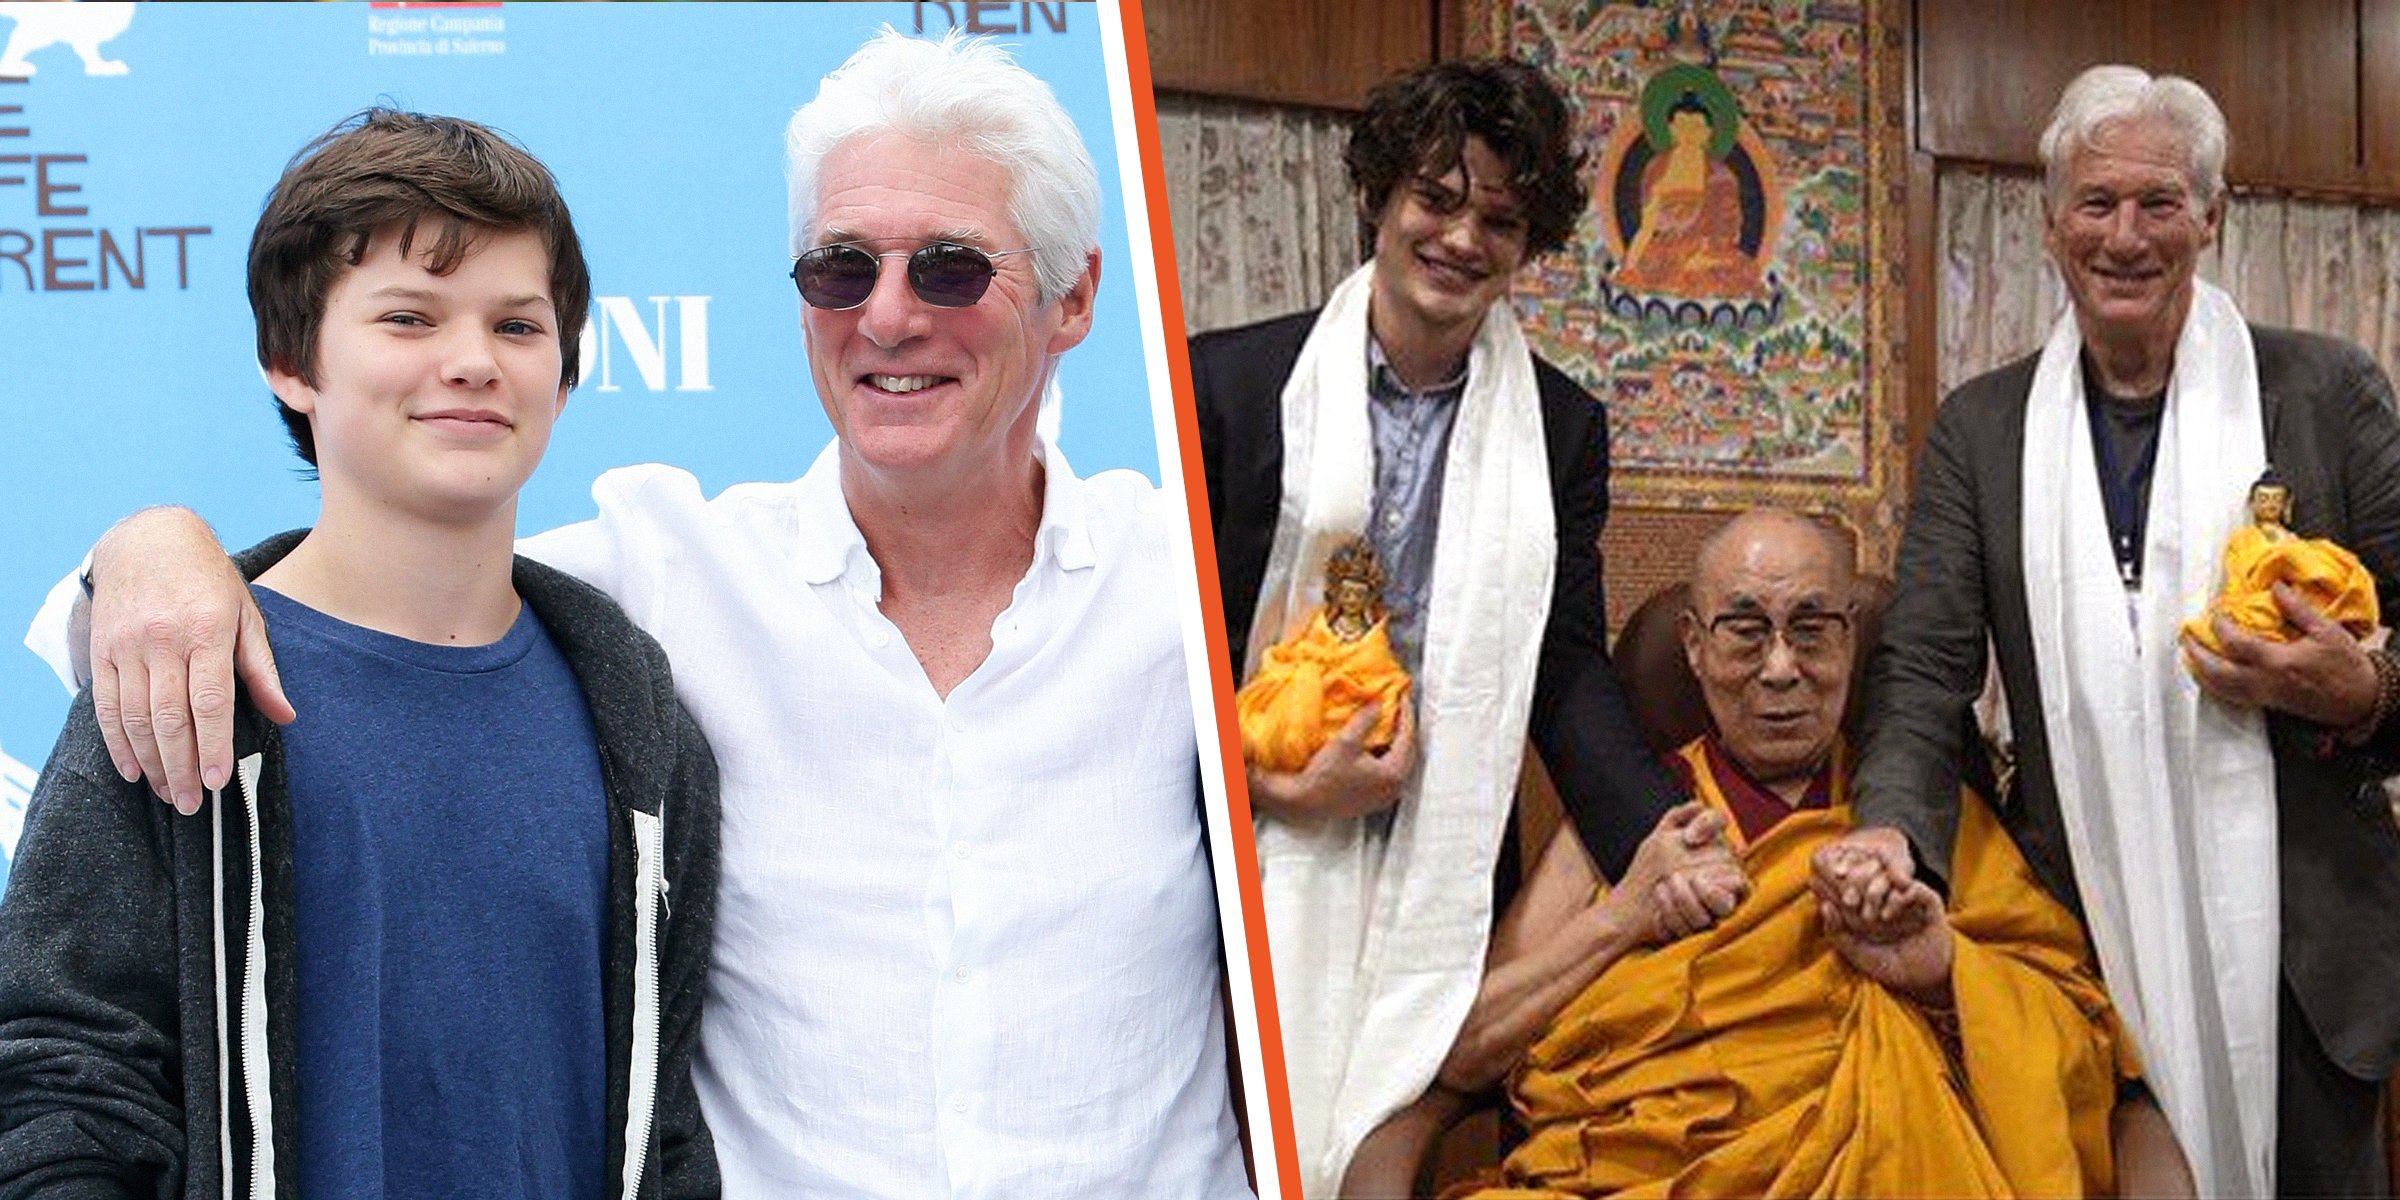 Richard Gere and Homer Gere | Richard Gere, Homer Gere, and the Dalai Lama. | Source: Getty Images | Twitter.com/NetTibet